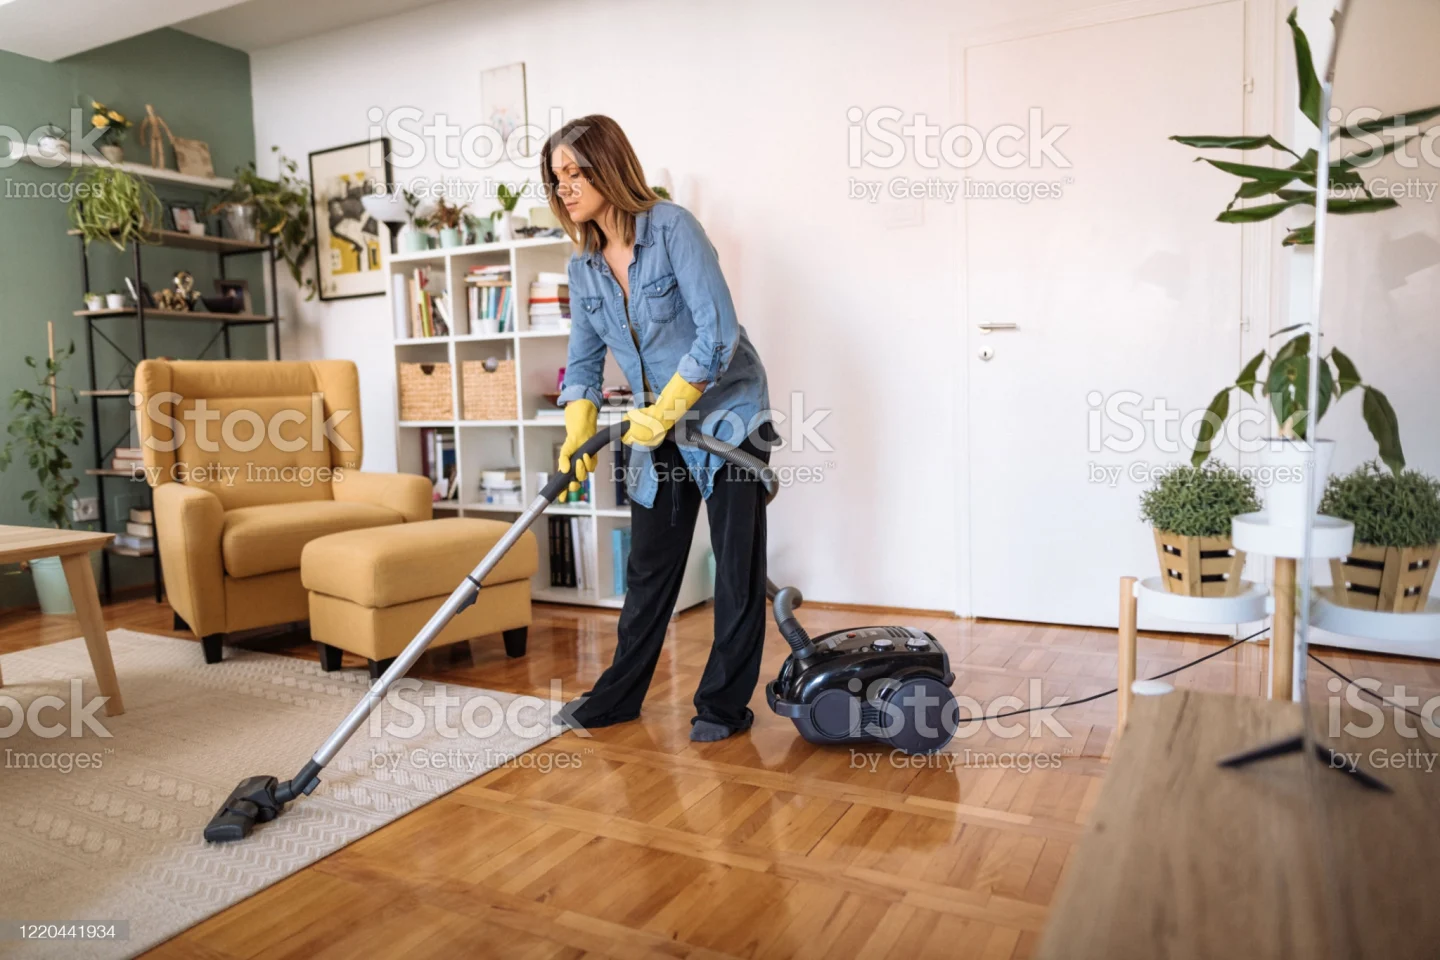 woman-vacuum-cleaning-the-living-room-and-cleaning-the-floors-picture-id1220441934